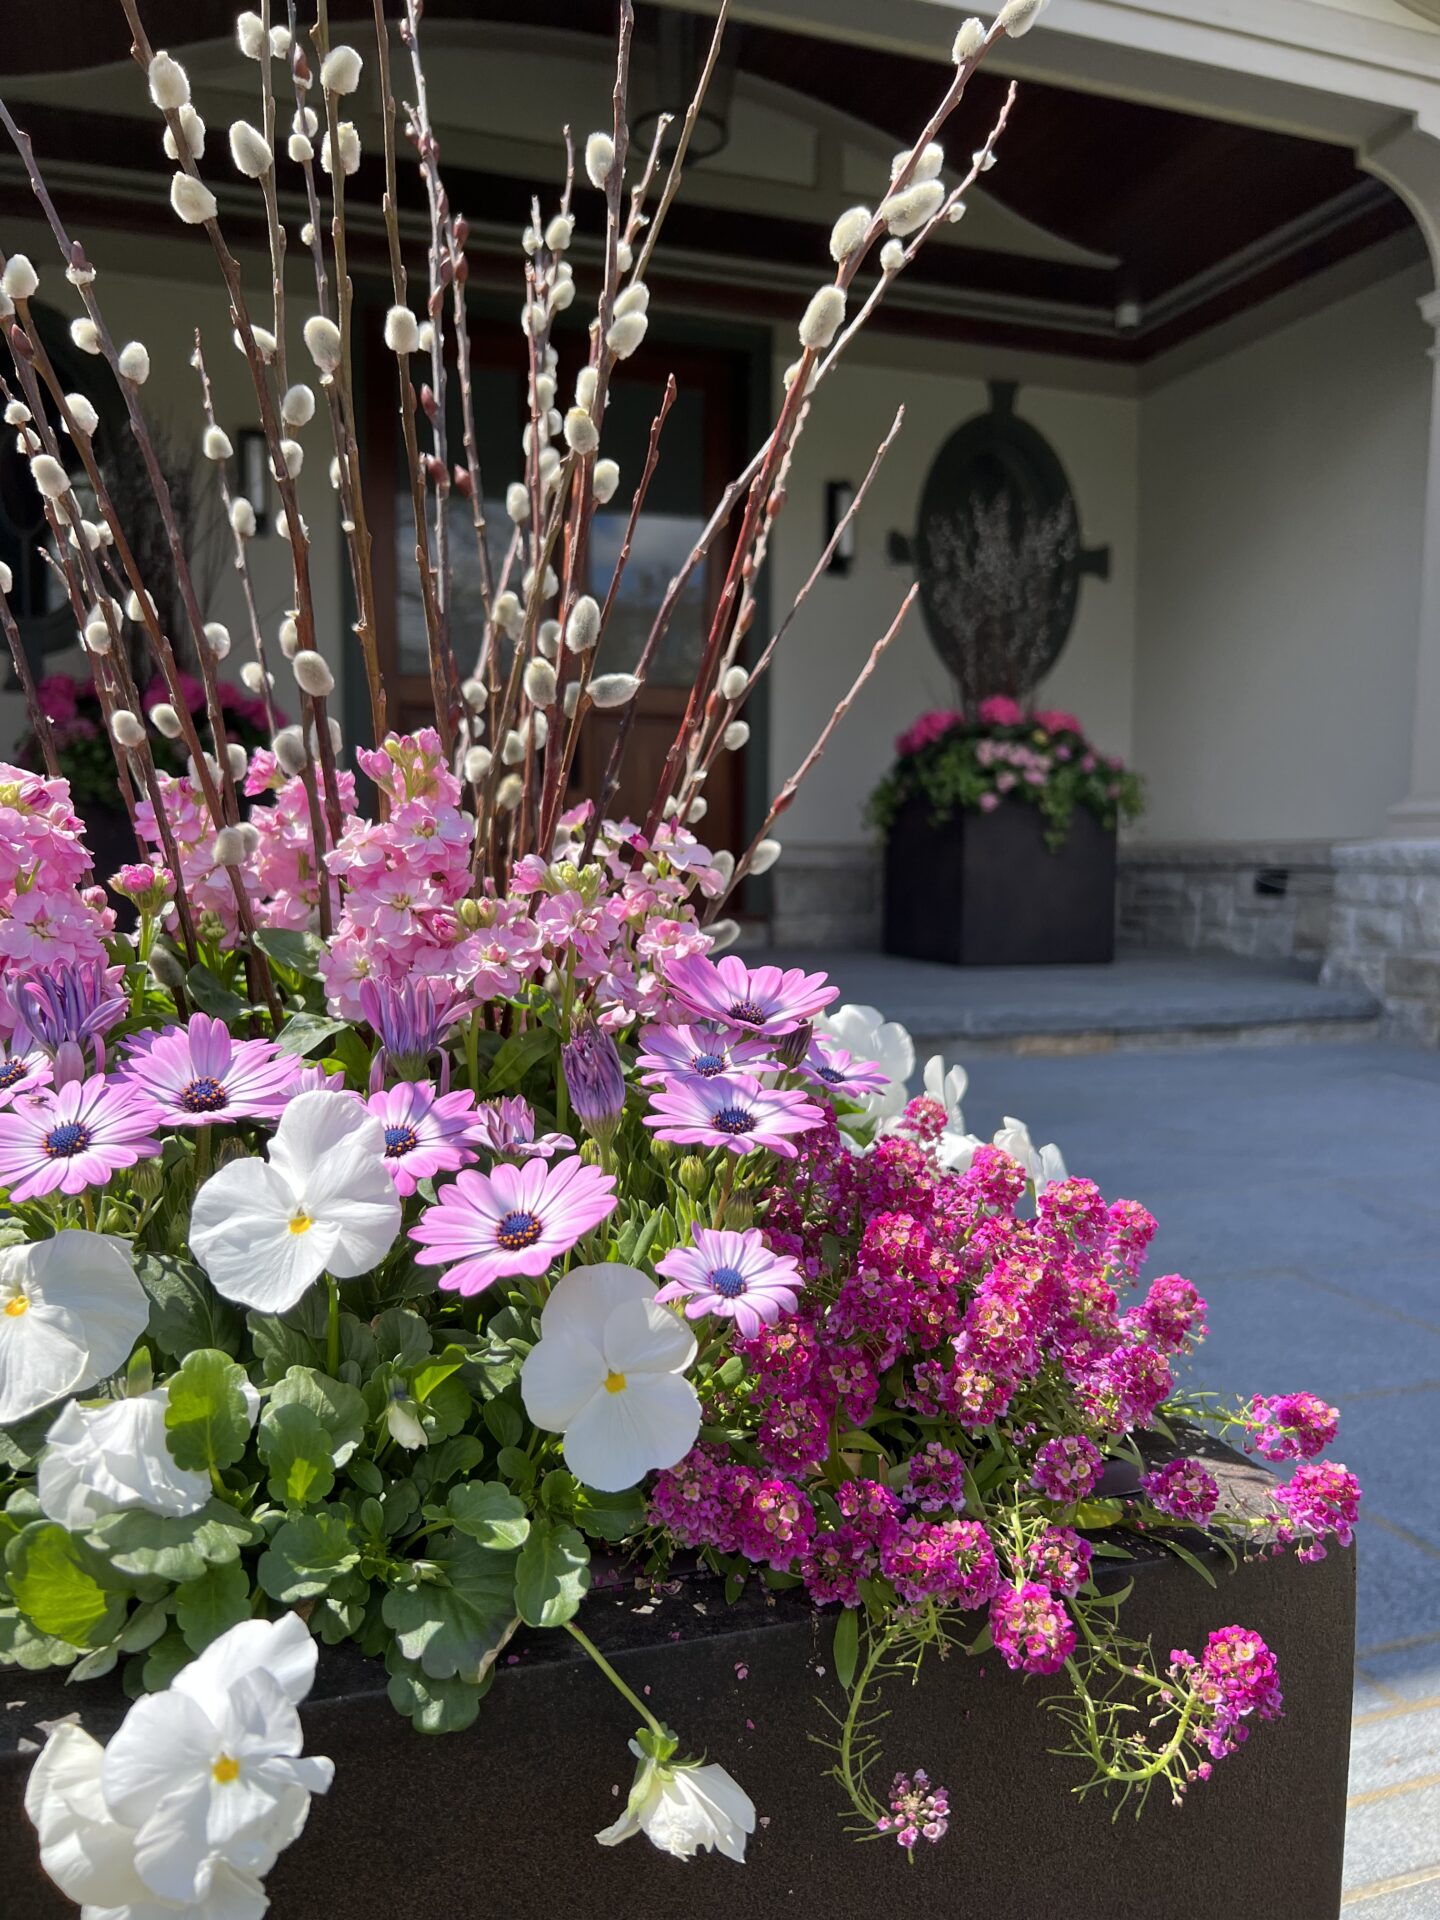 A vibrant arrangement of white, purple, and pink flowers with pussy willow branches in the foreground; a house entrance and urn planter in the background.